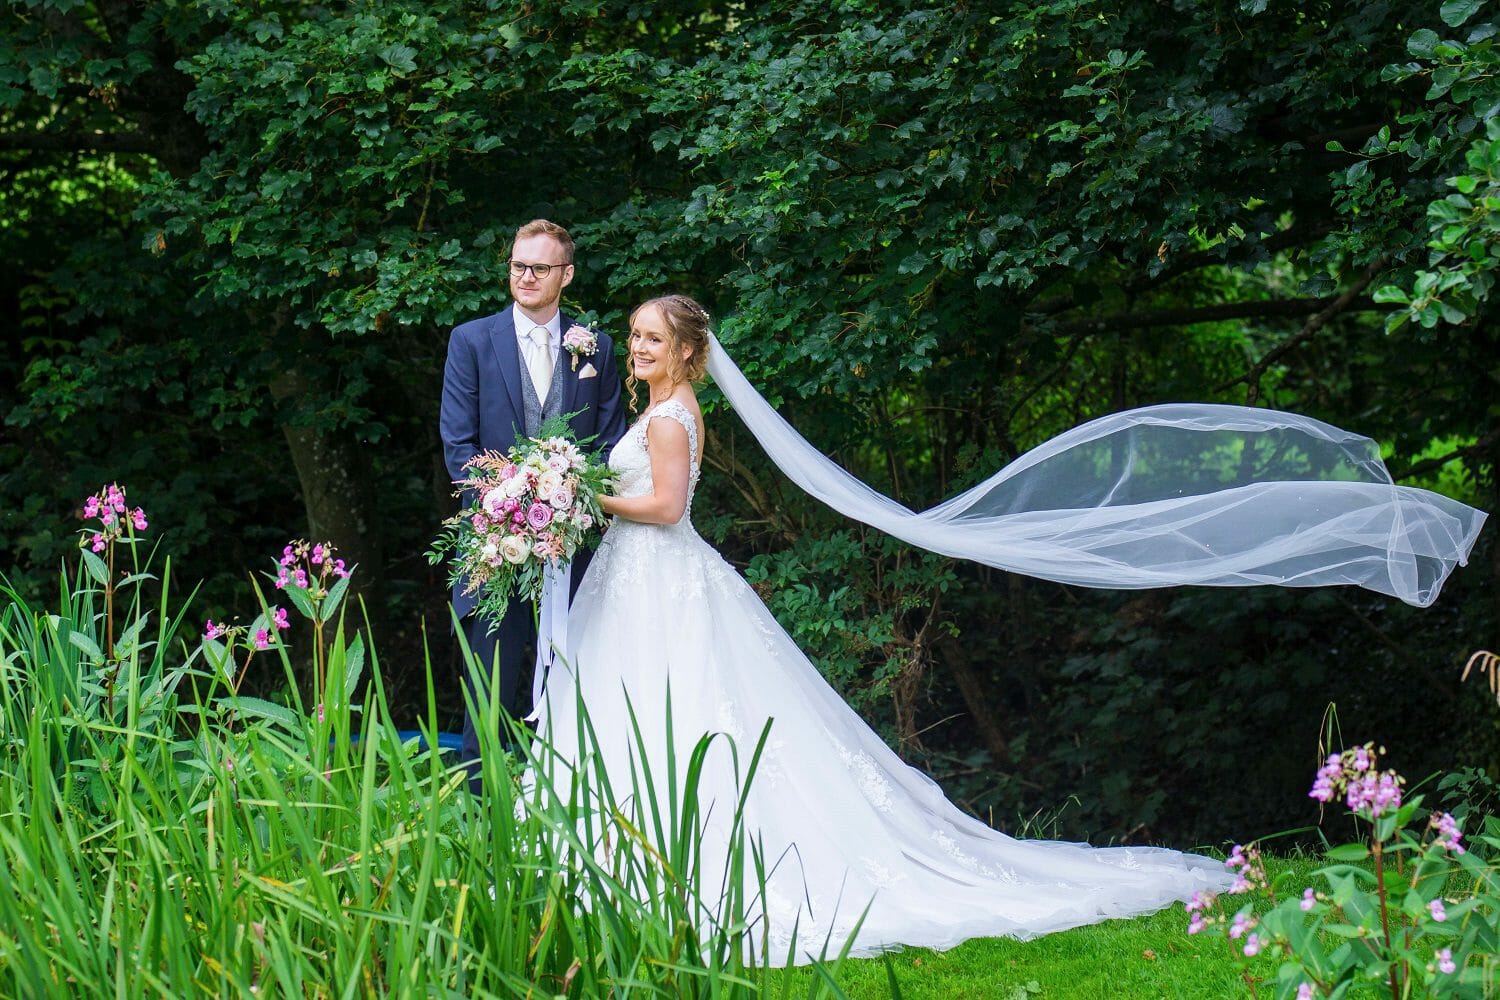 A beautiful floating wedding veil at Haselbury Mill Crewkerne, taken by Victoria Welton Photography